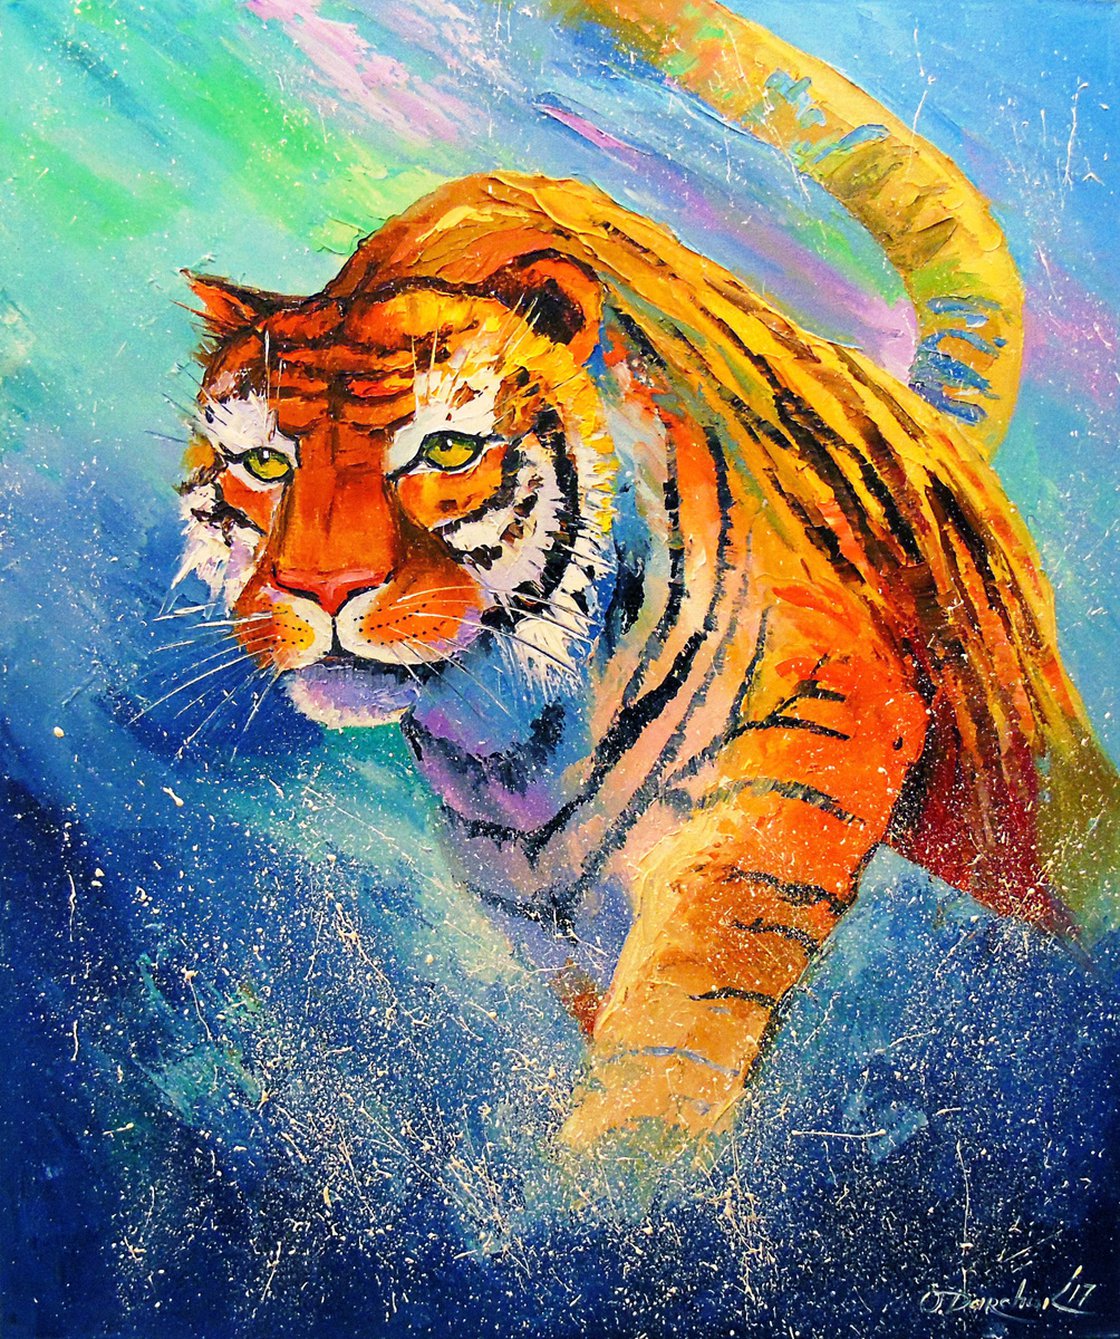 oil paintings of tiger